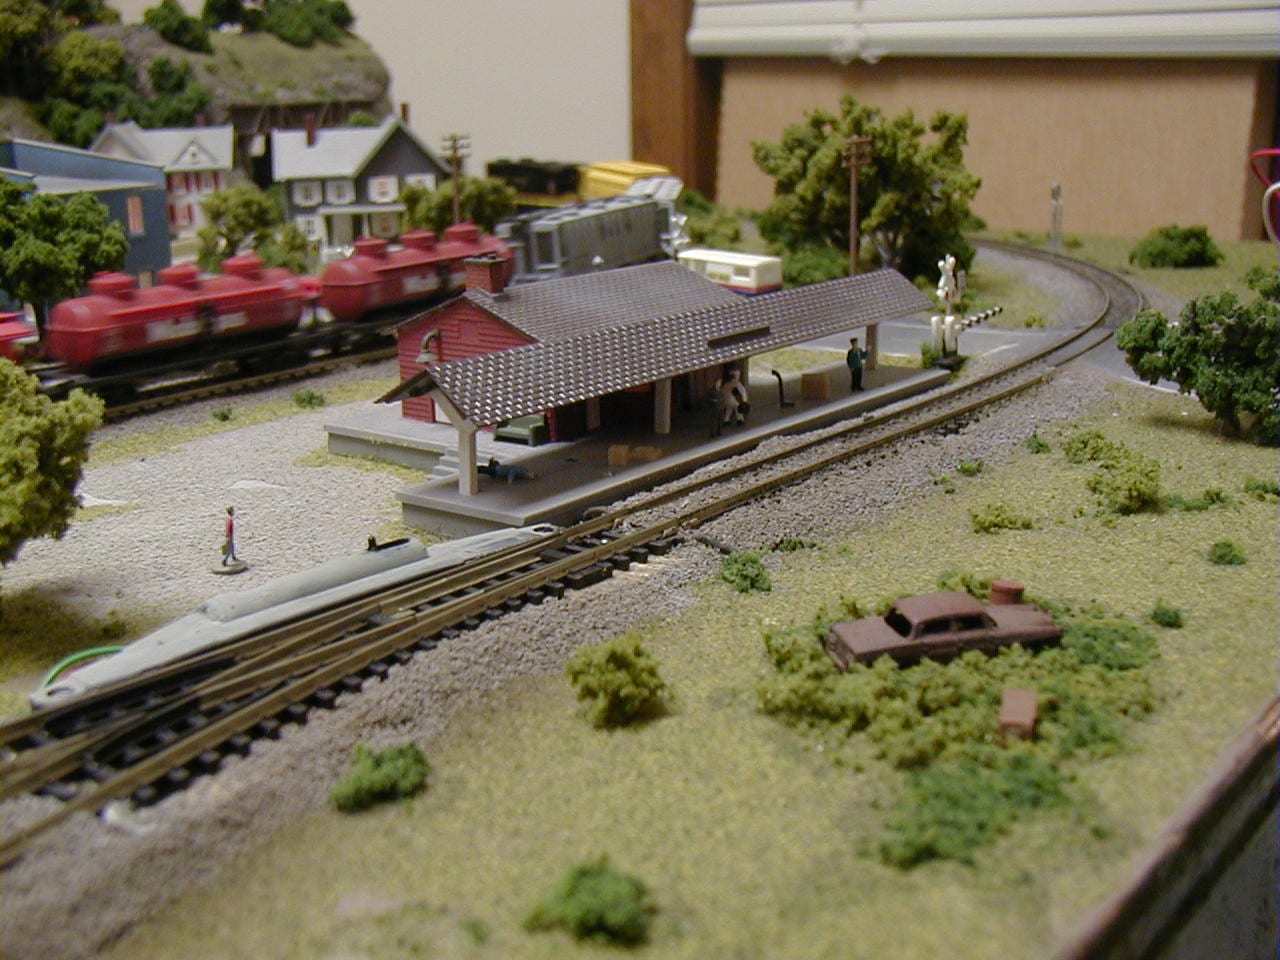  Incredible 4′ X 4′ N Scale Model Train Layout Photo Gallery